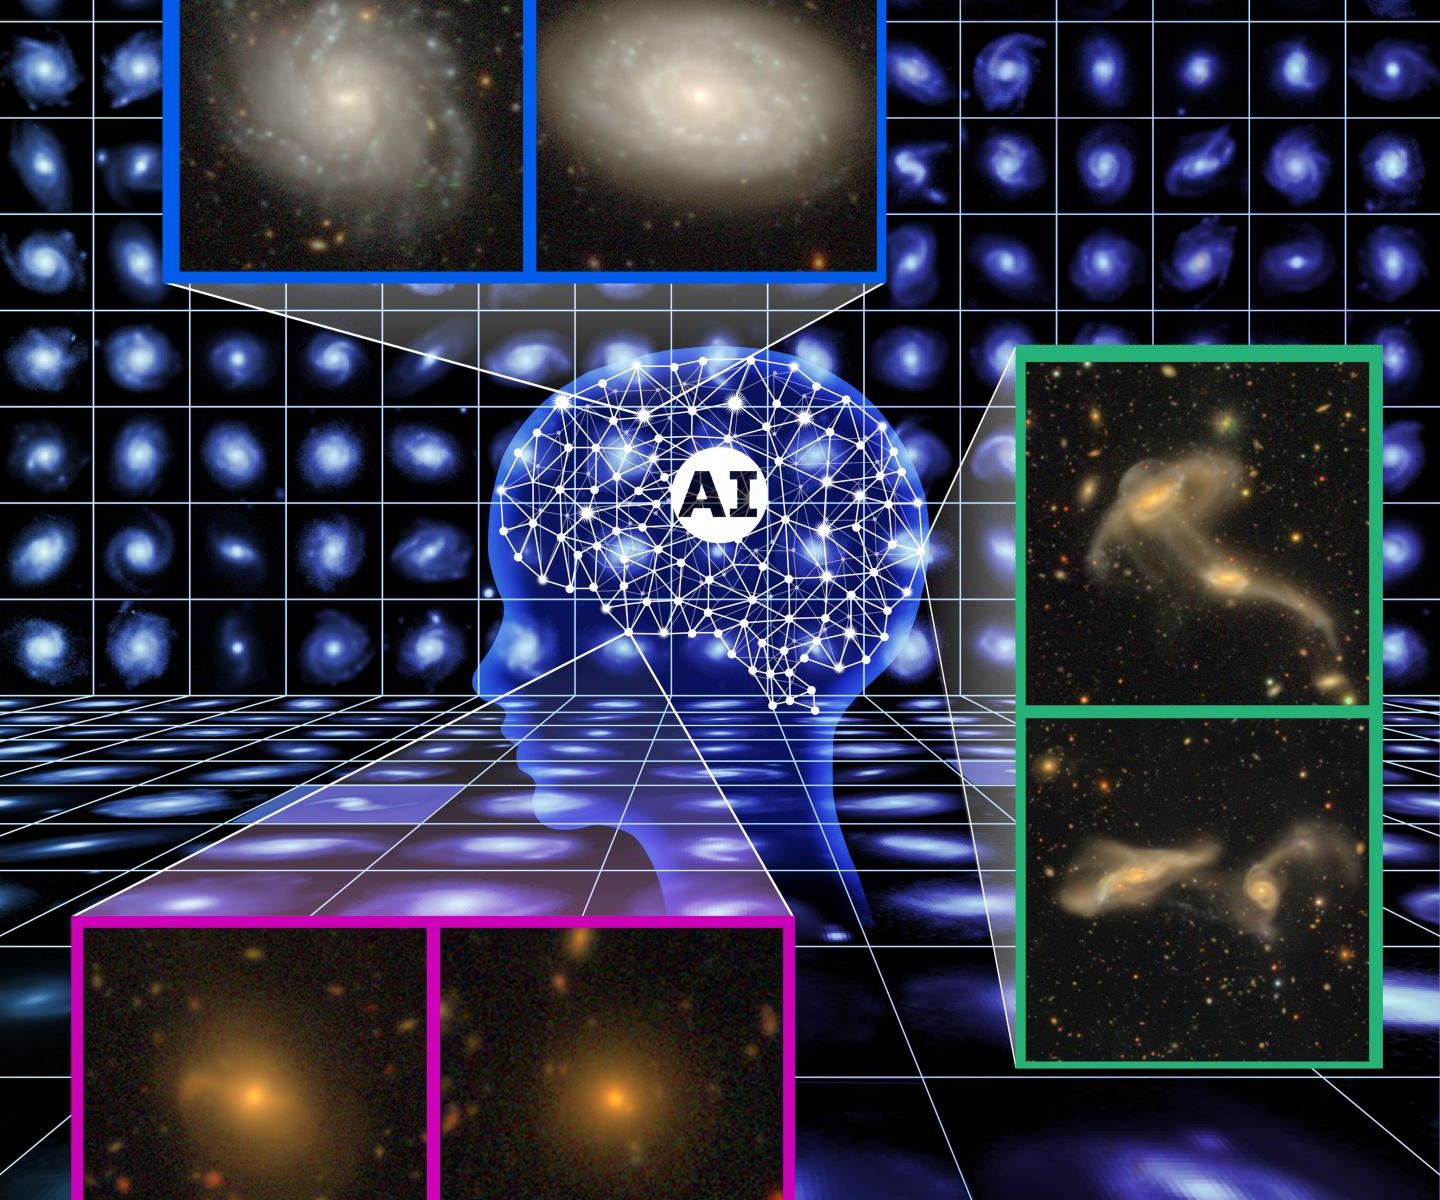 Shows some of the galaxies in Subaru's image set that allows them to be classified.